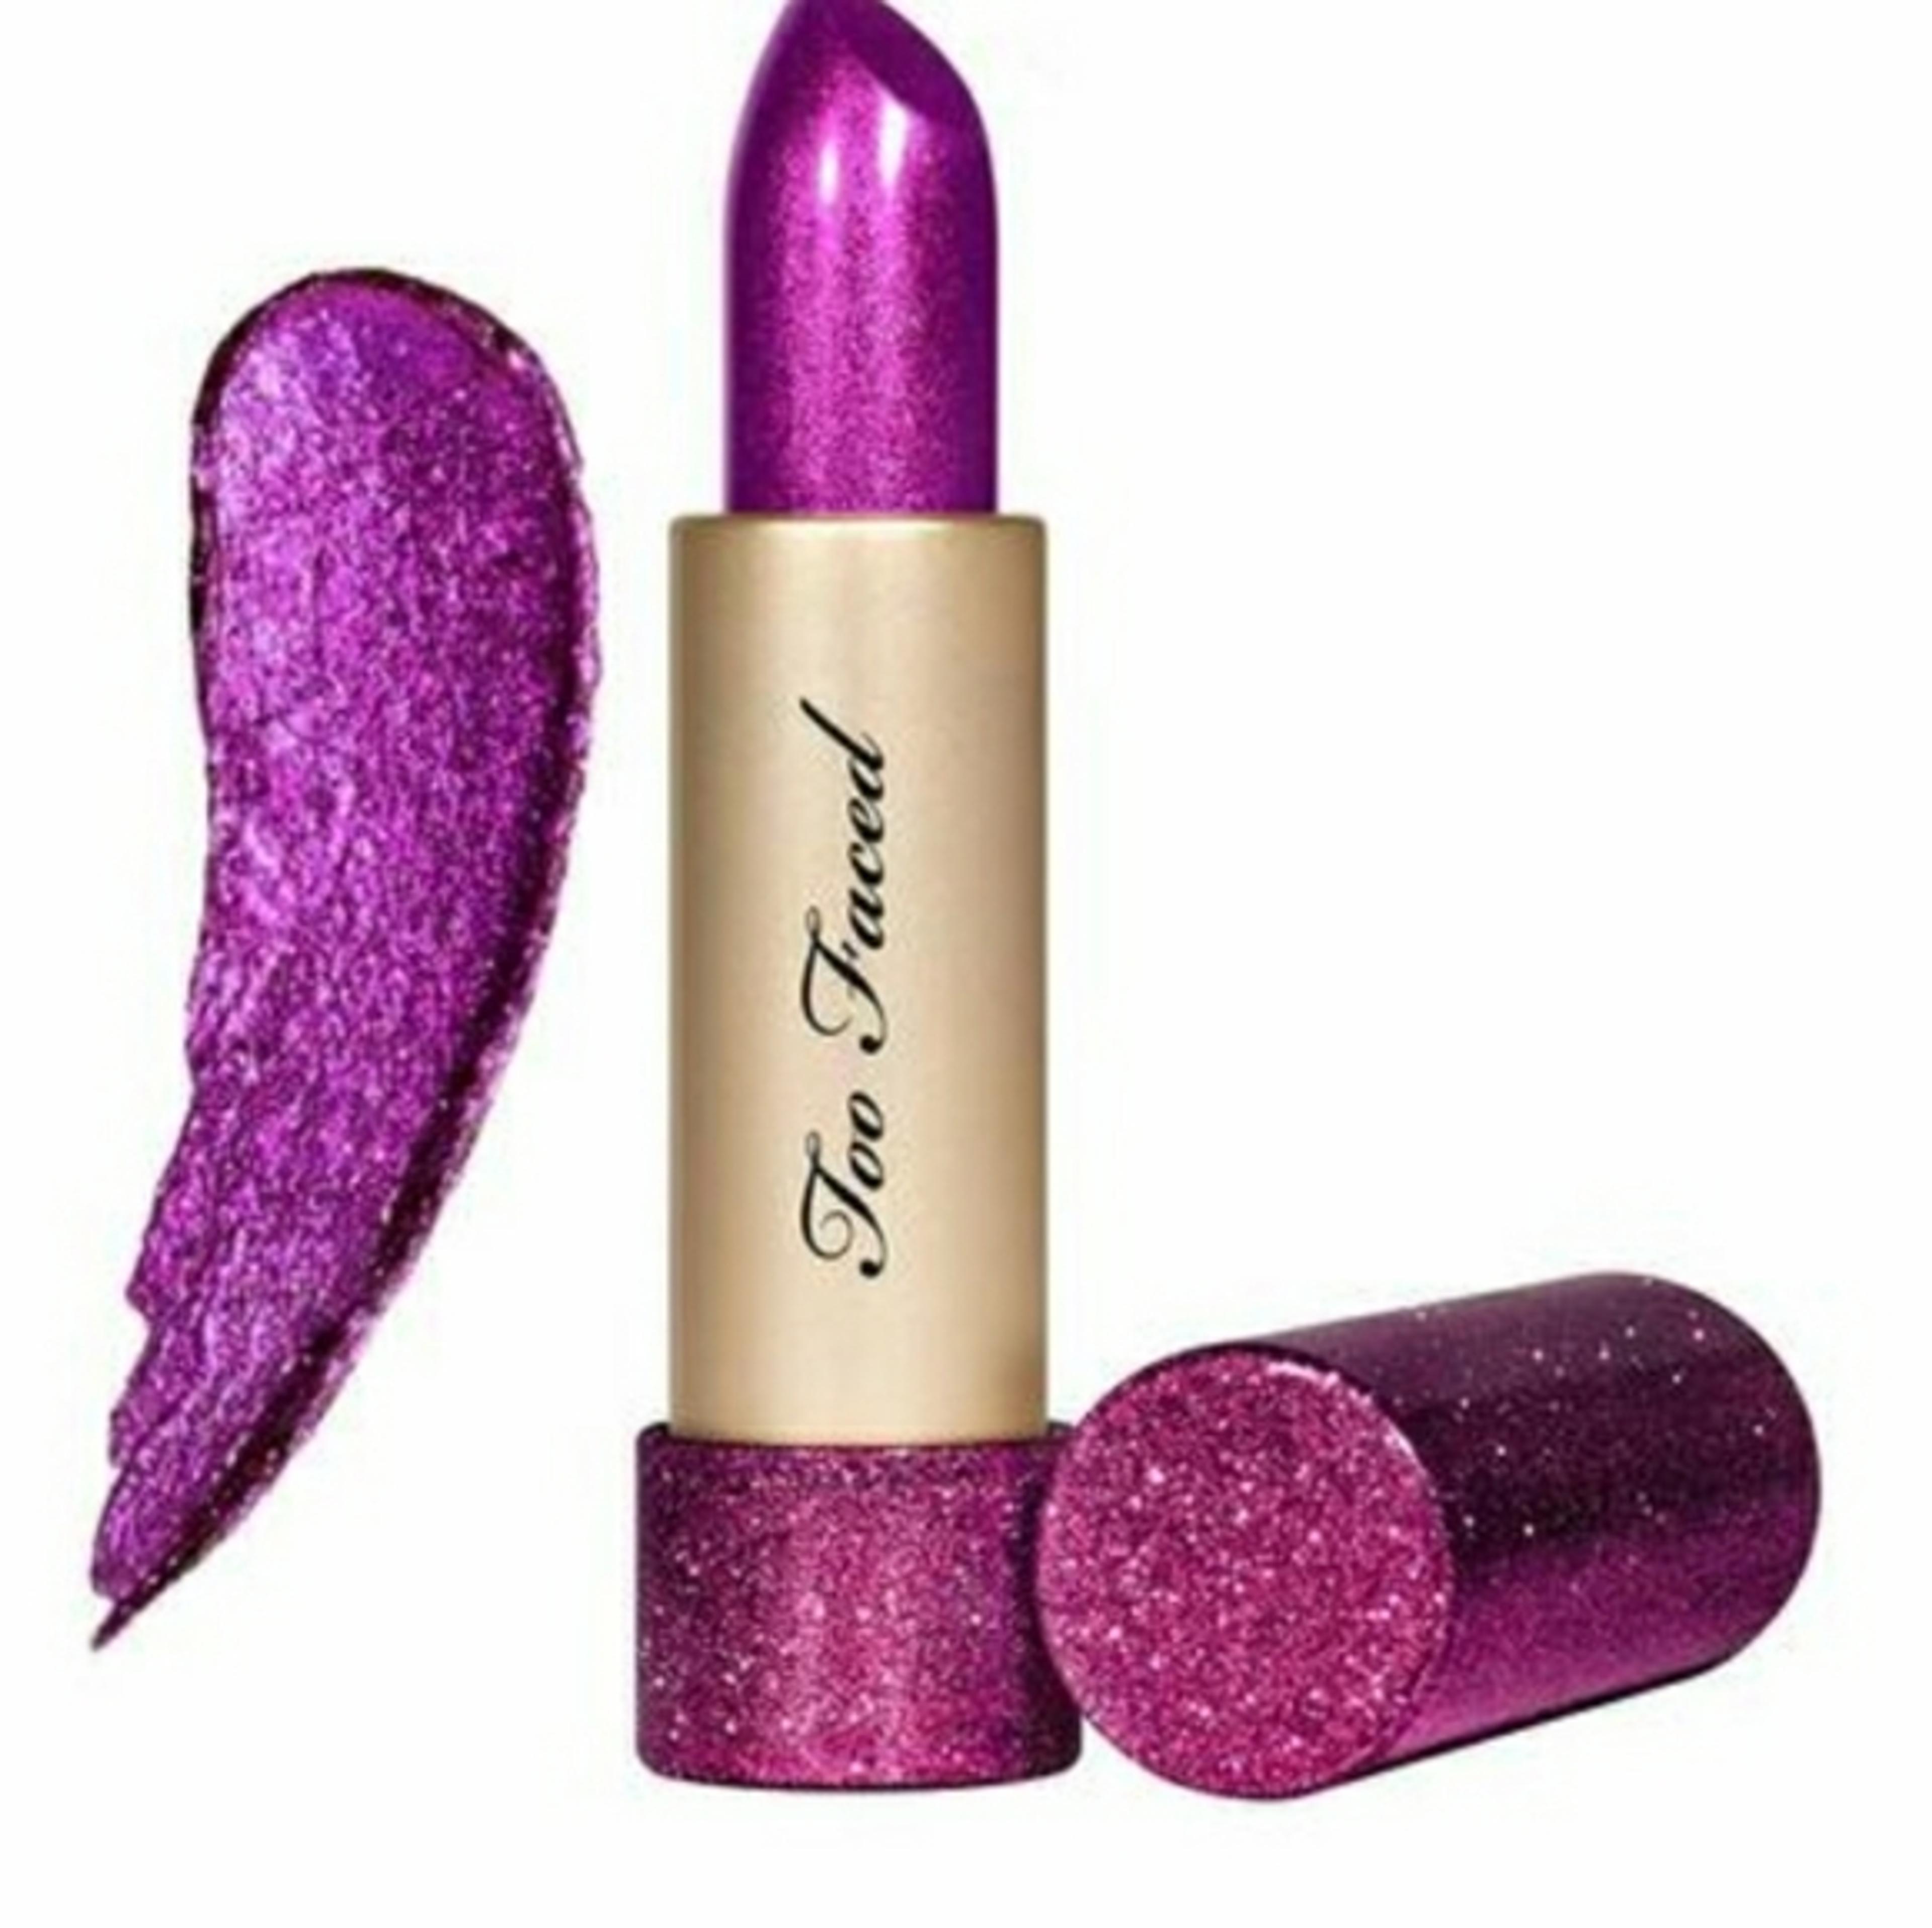 💜PIXIE STICK Too Faced DISCONTINUED Limited Edition Throwback Lipstick NWT